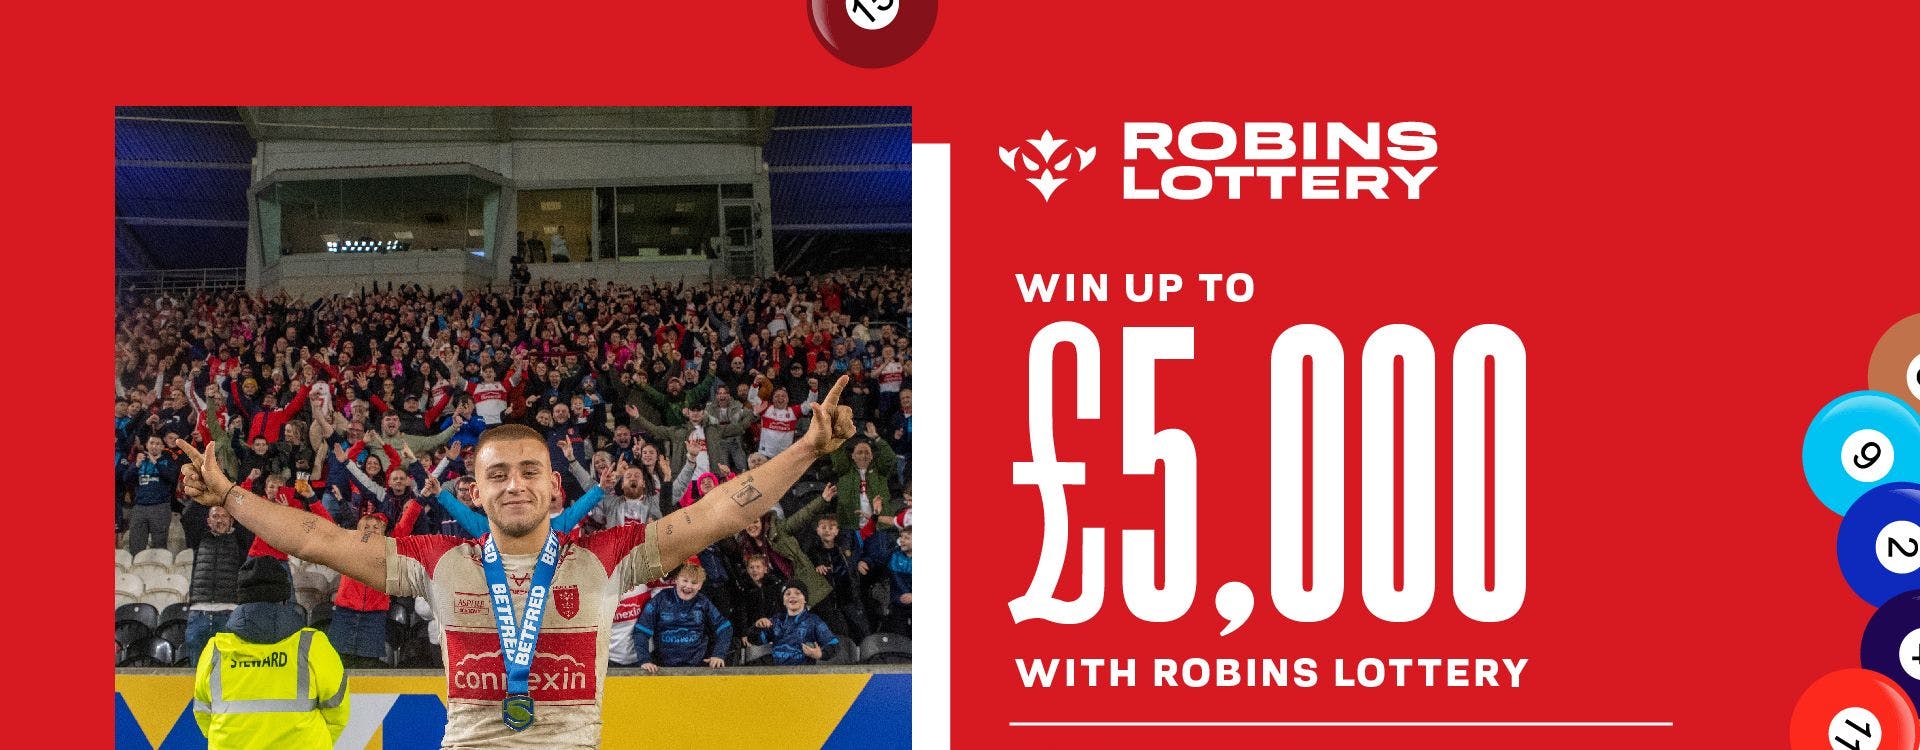 Robins Lottery Relaunched